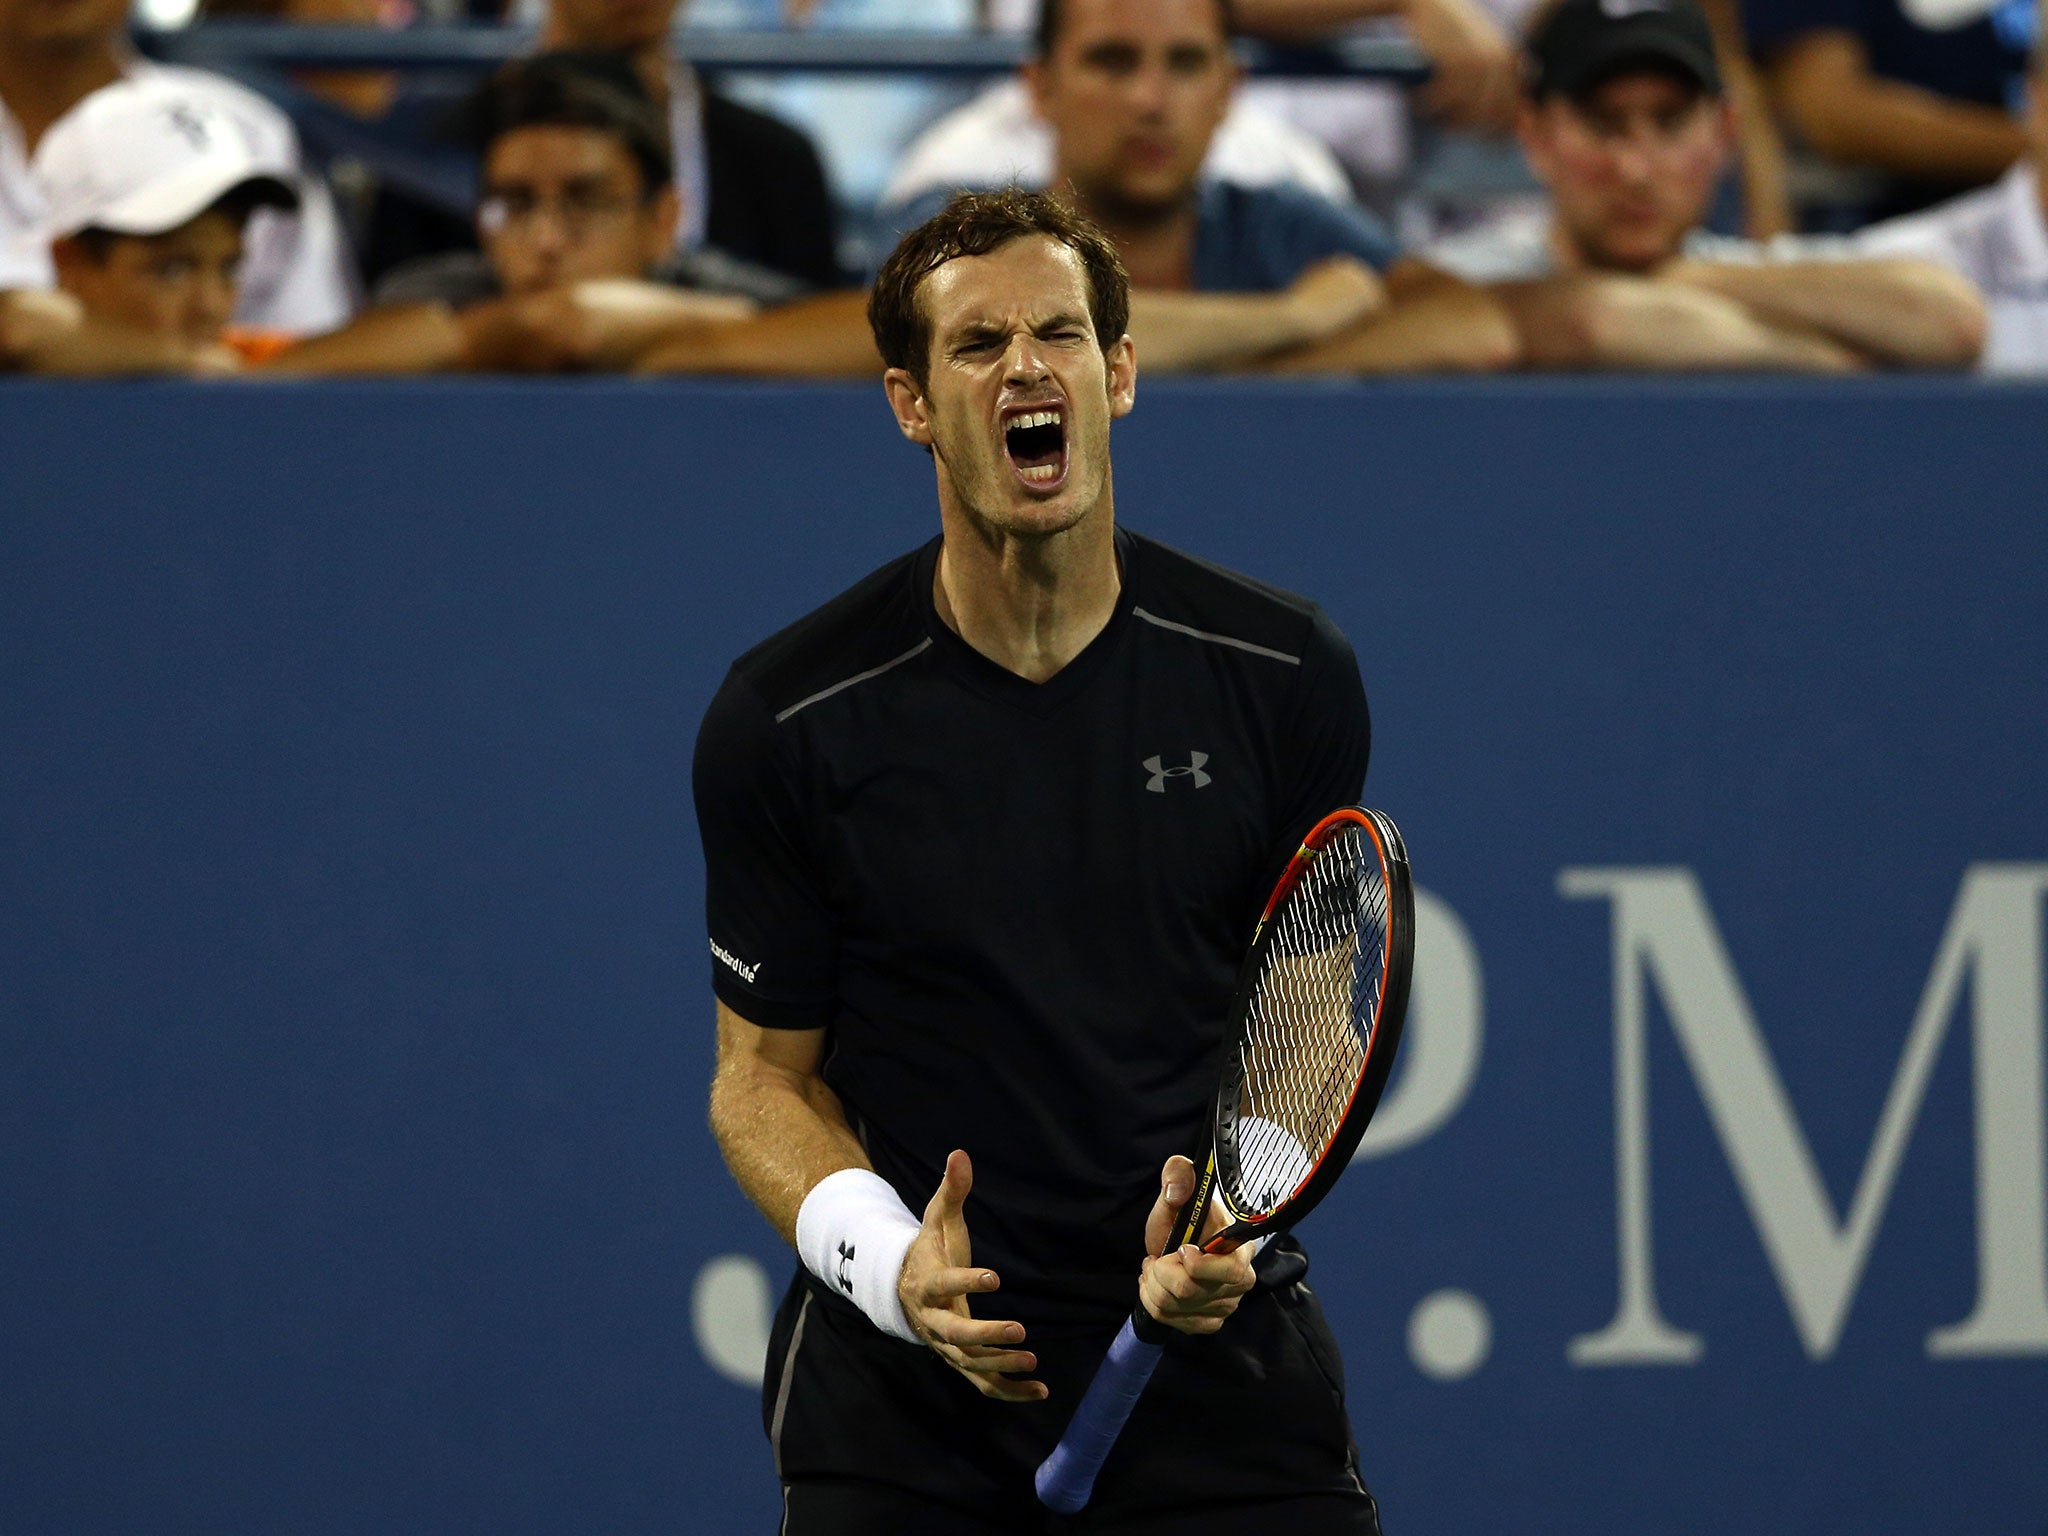 Andy Murray shouts in anger after losing a point to Kevin Anderson